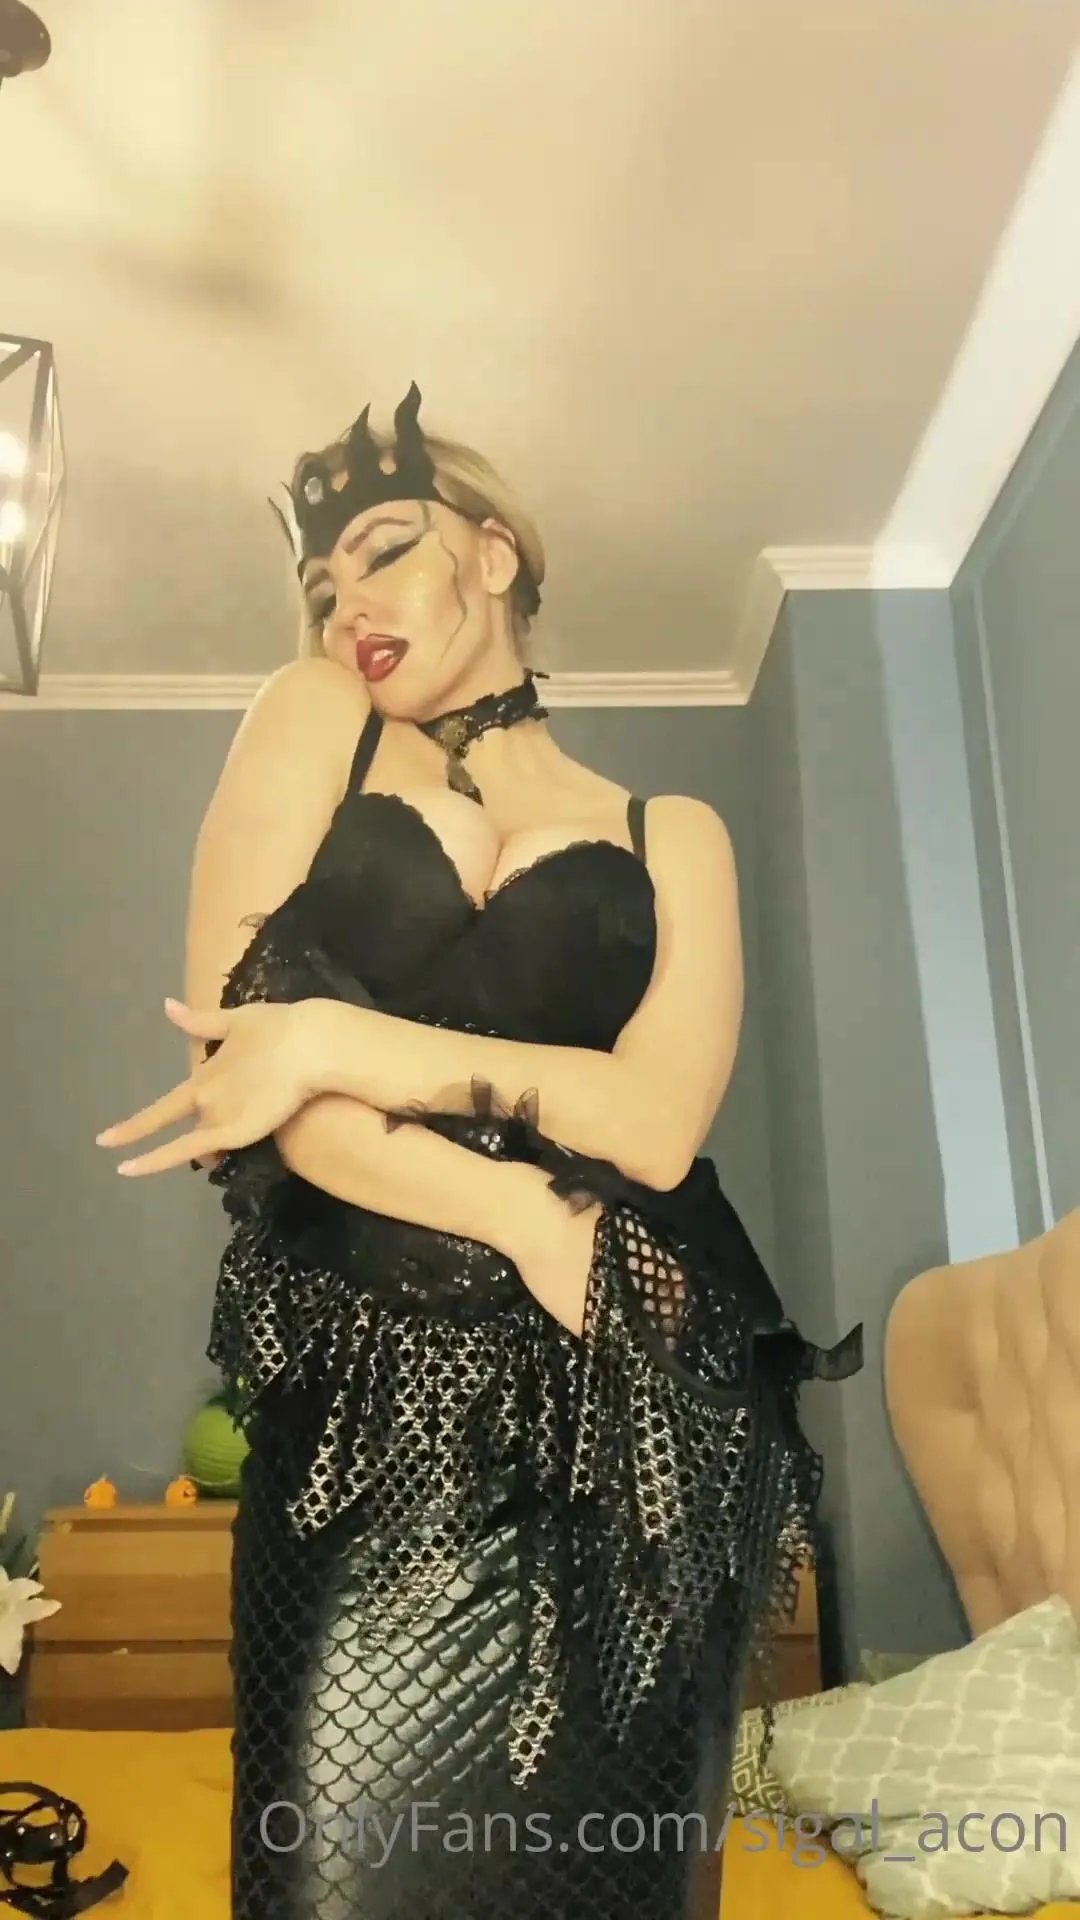 Dairect Xxx - Allnatural sigal queen of seas get naked second part in direct xxx onlyfans porn  videos